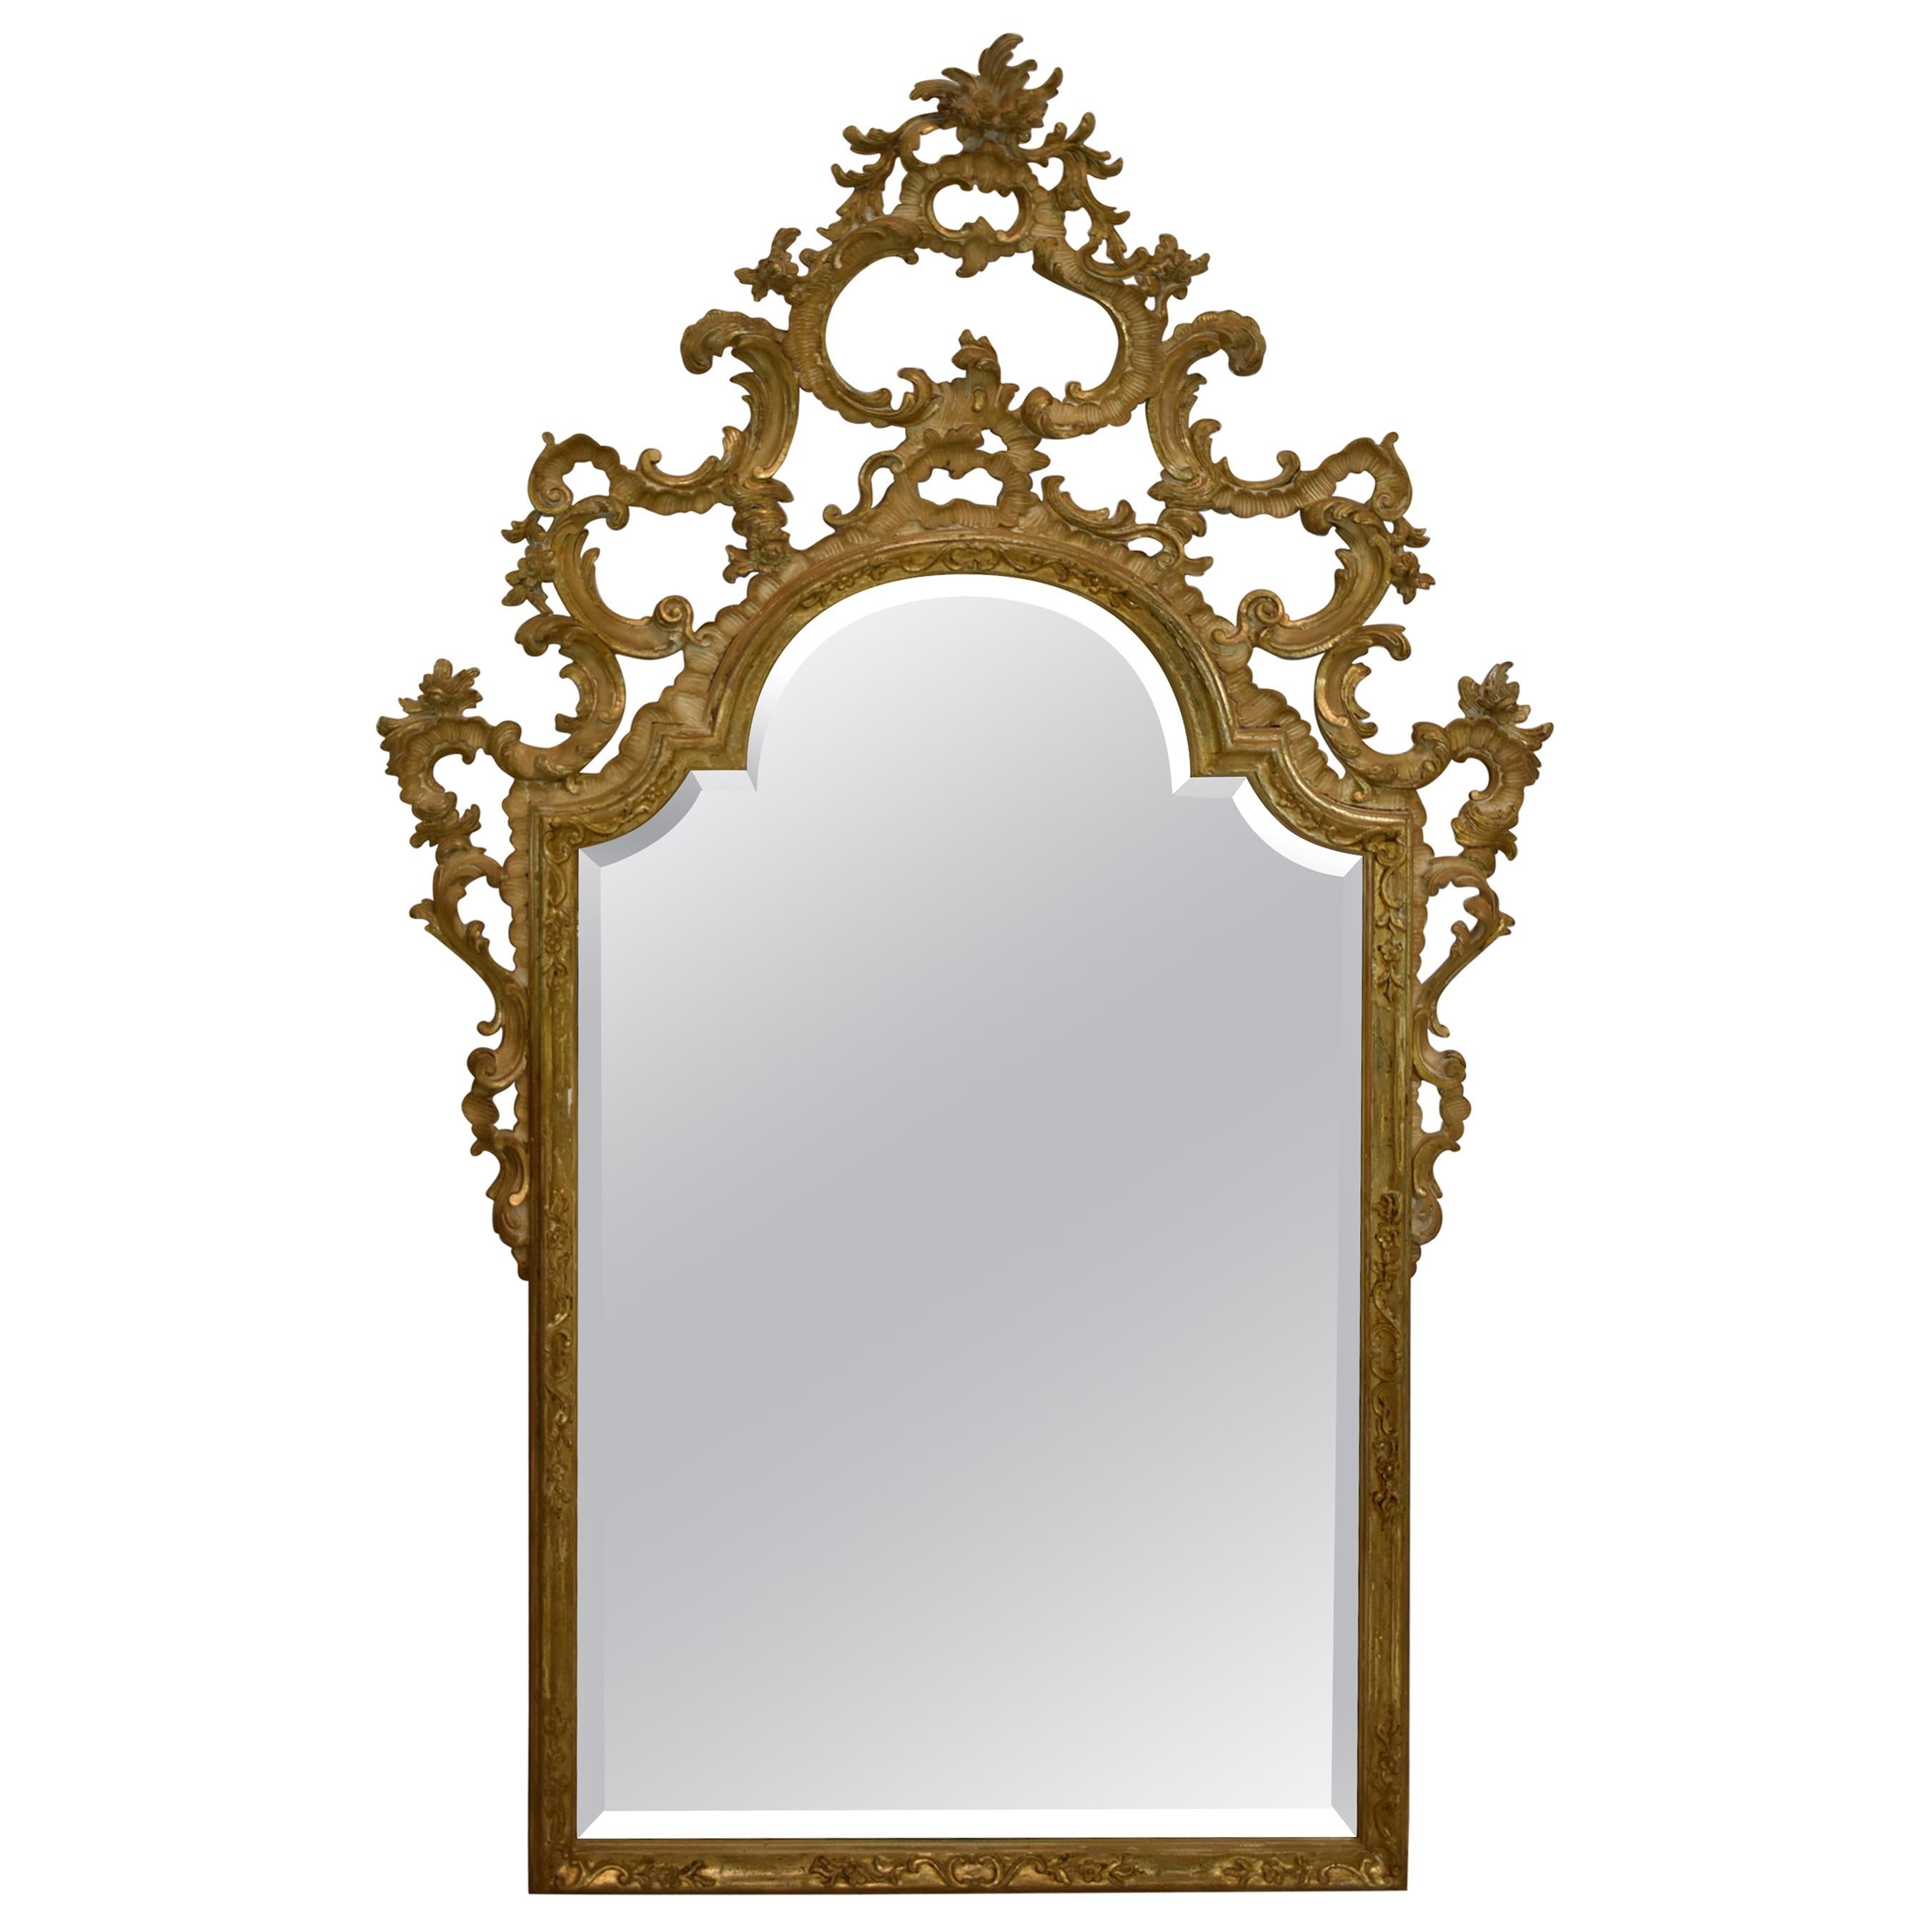 Hand Carved Wood Frame Italian Renaissance Style Beveled Glass Mirror